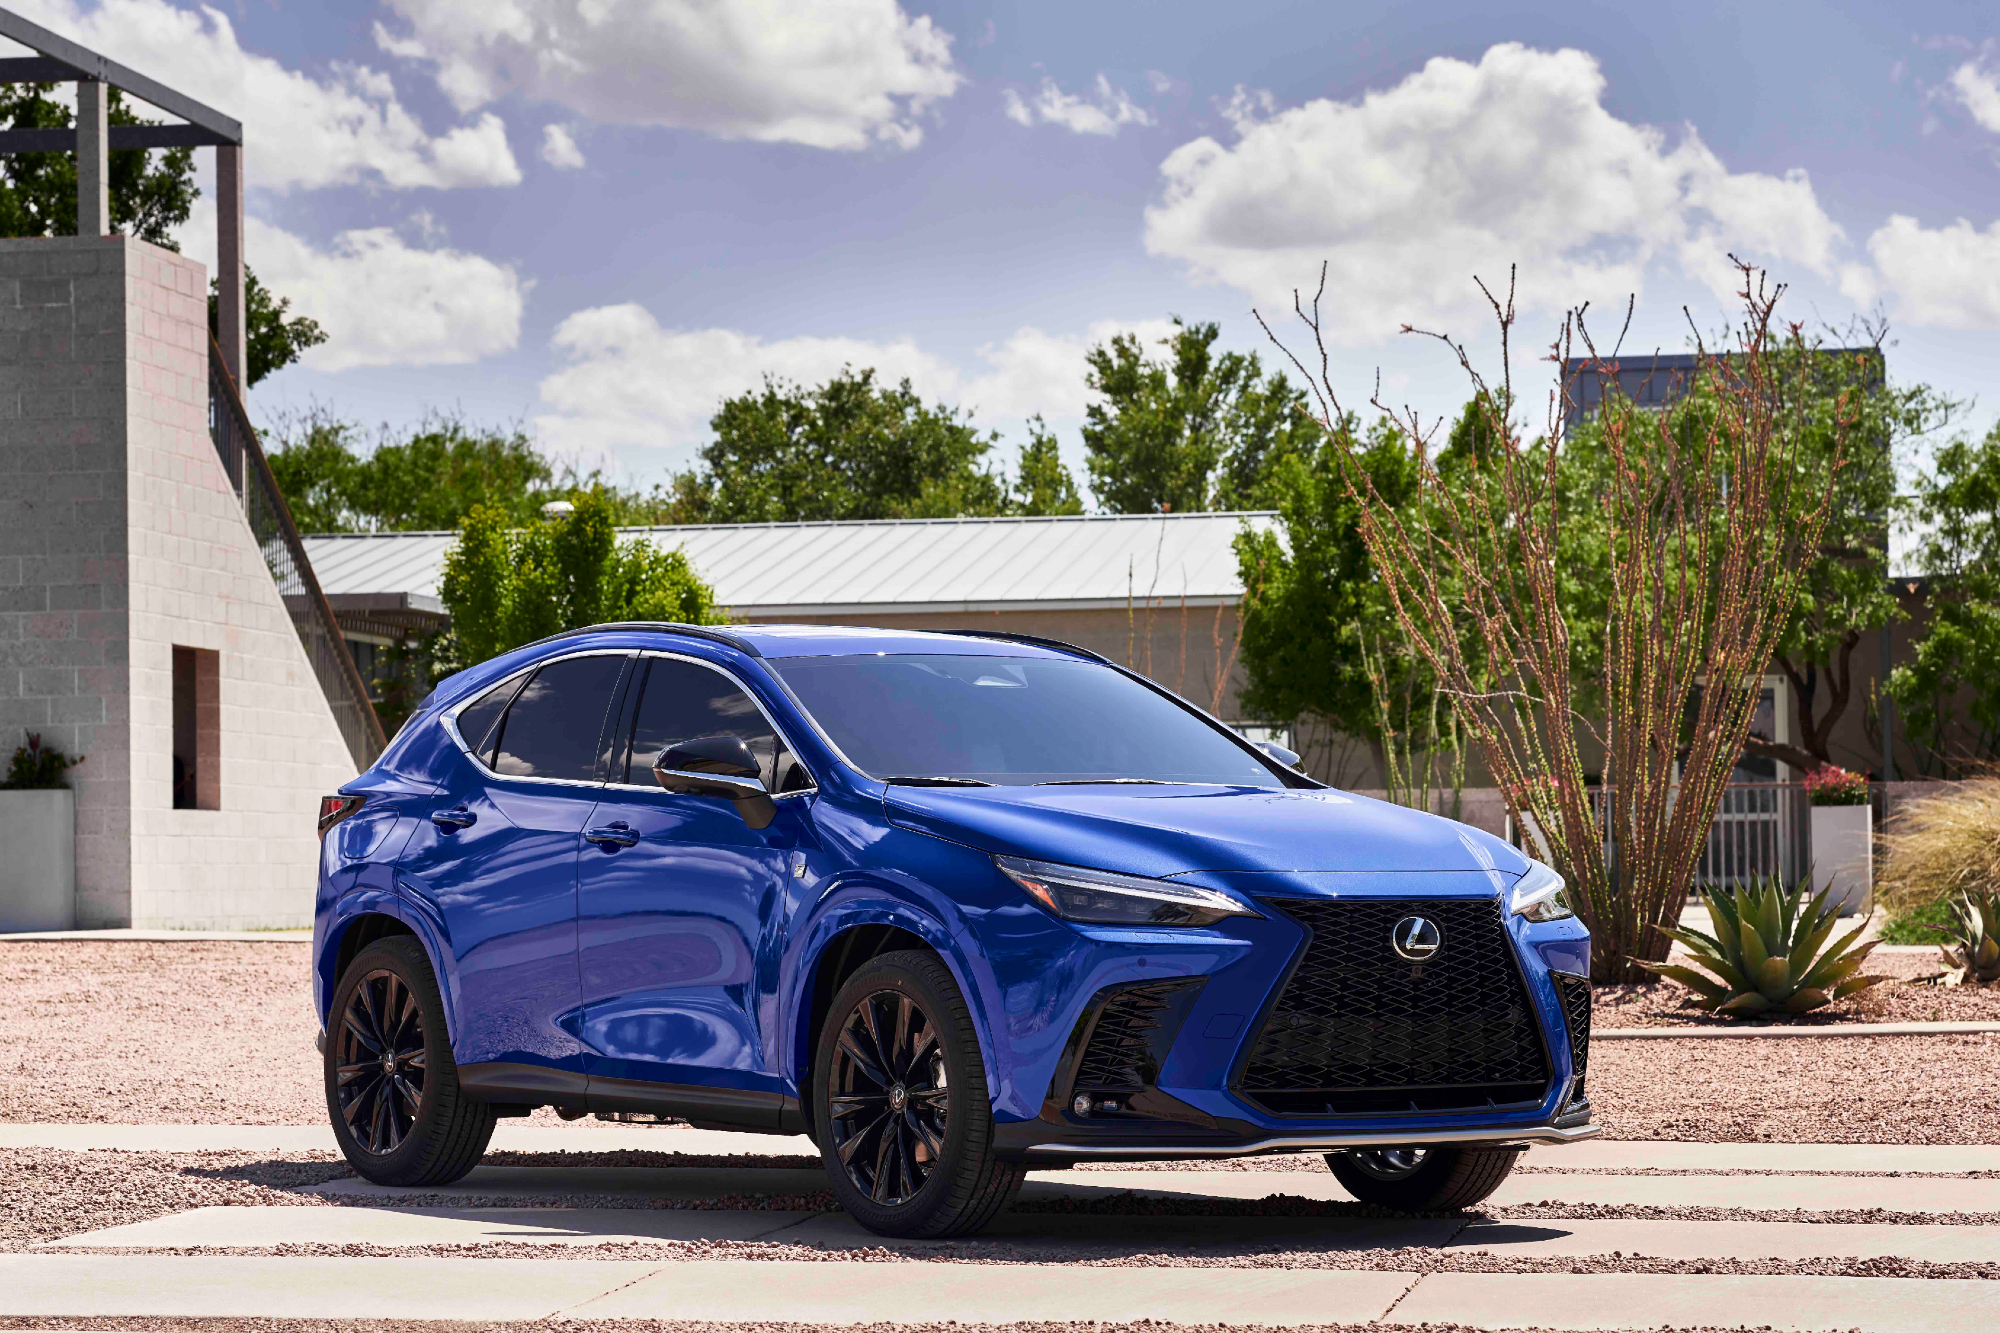 All Lexus models explained: Your complete buying guide - The Manual